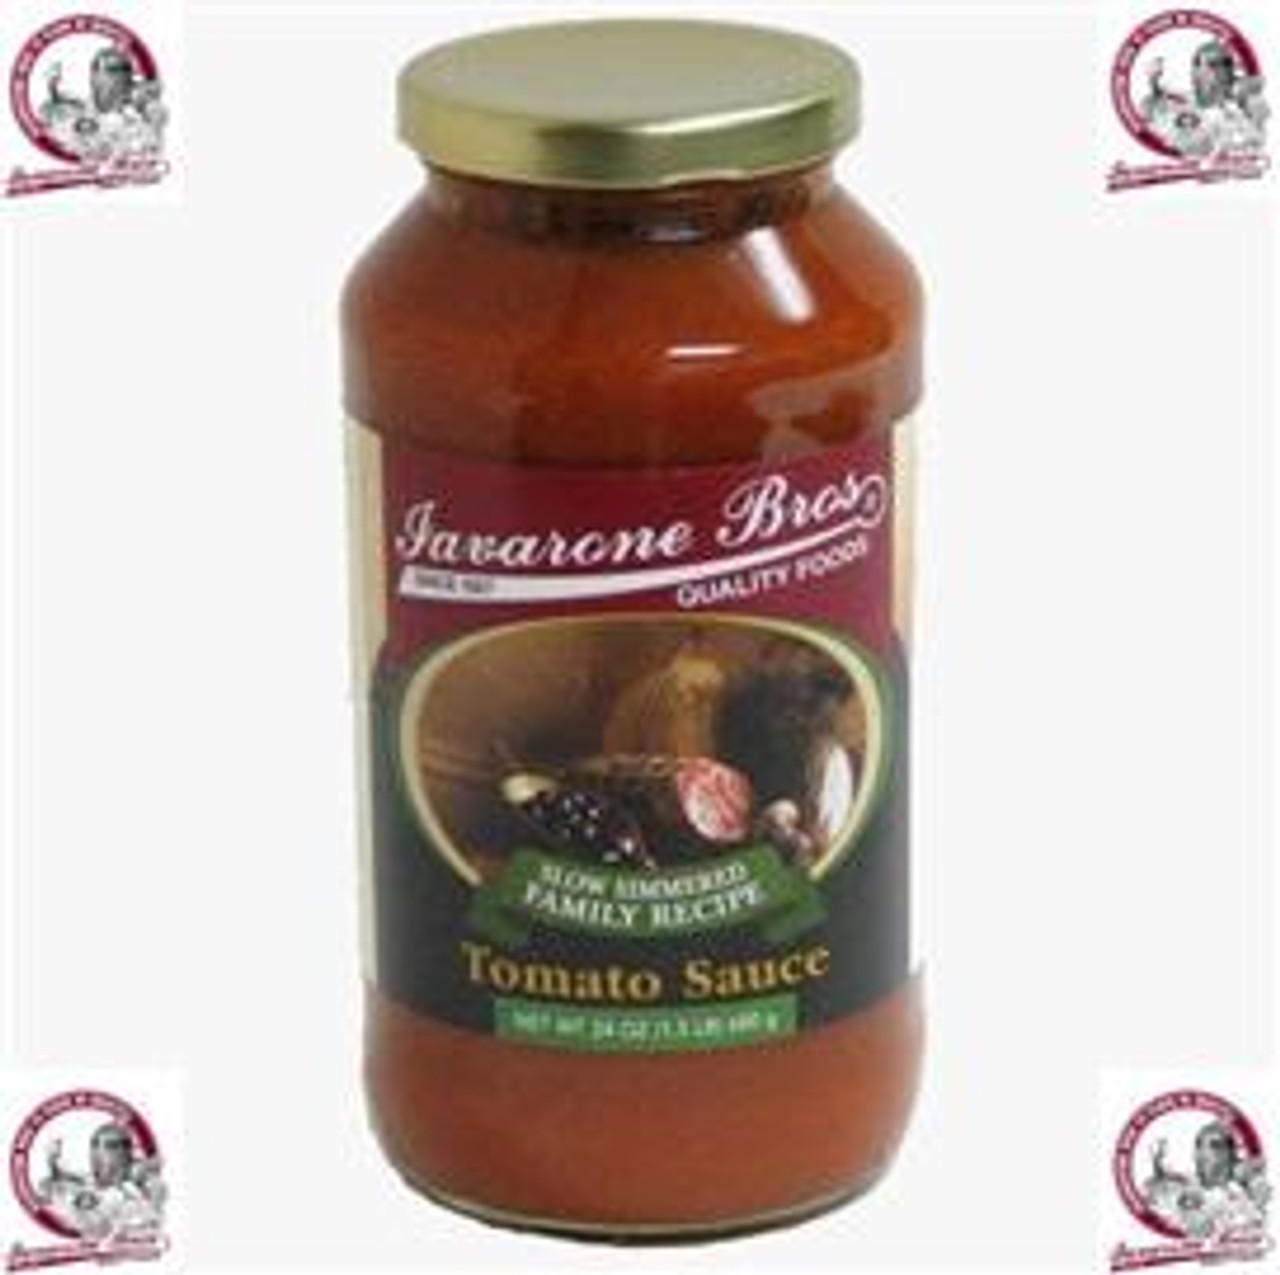 Tomato Sauce- Slow Simmered Family Recipe